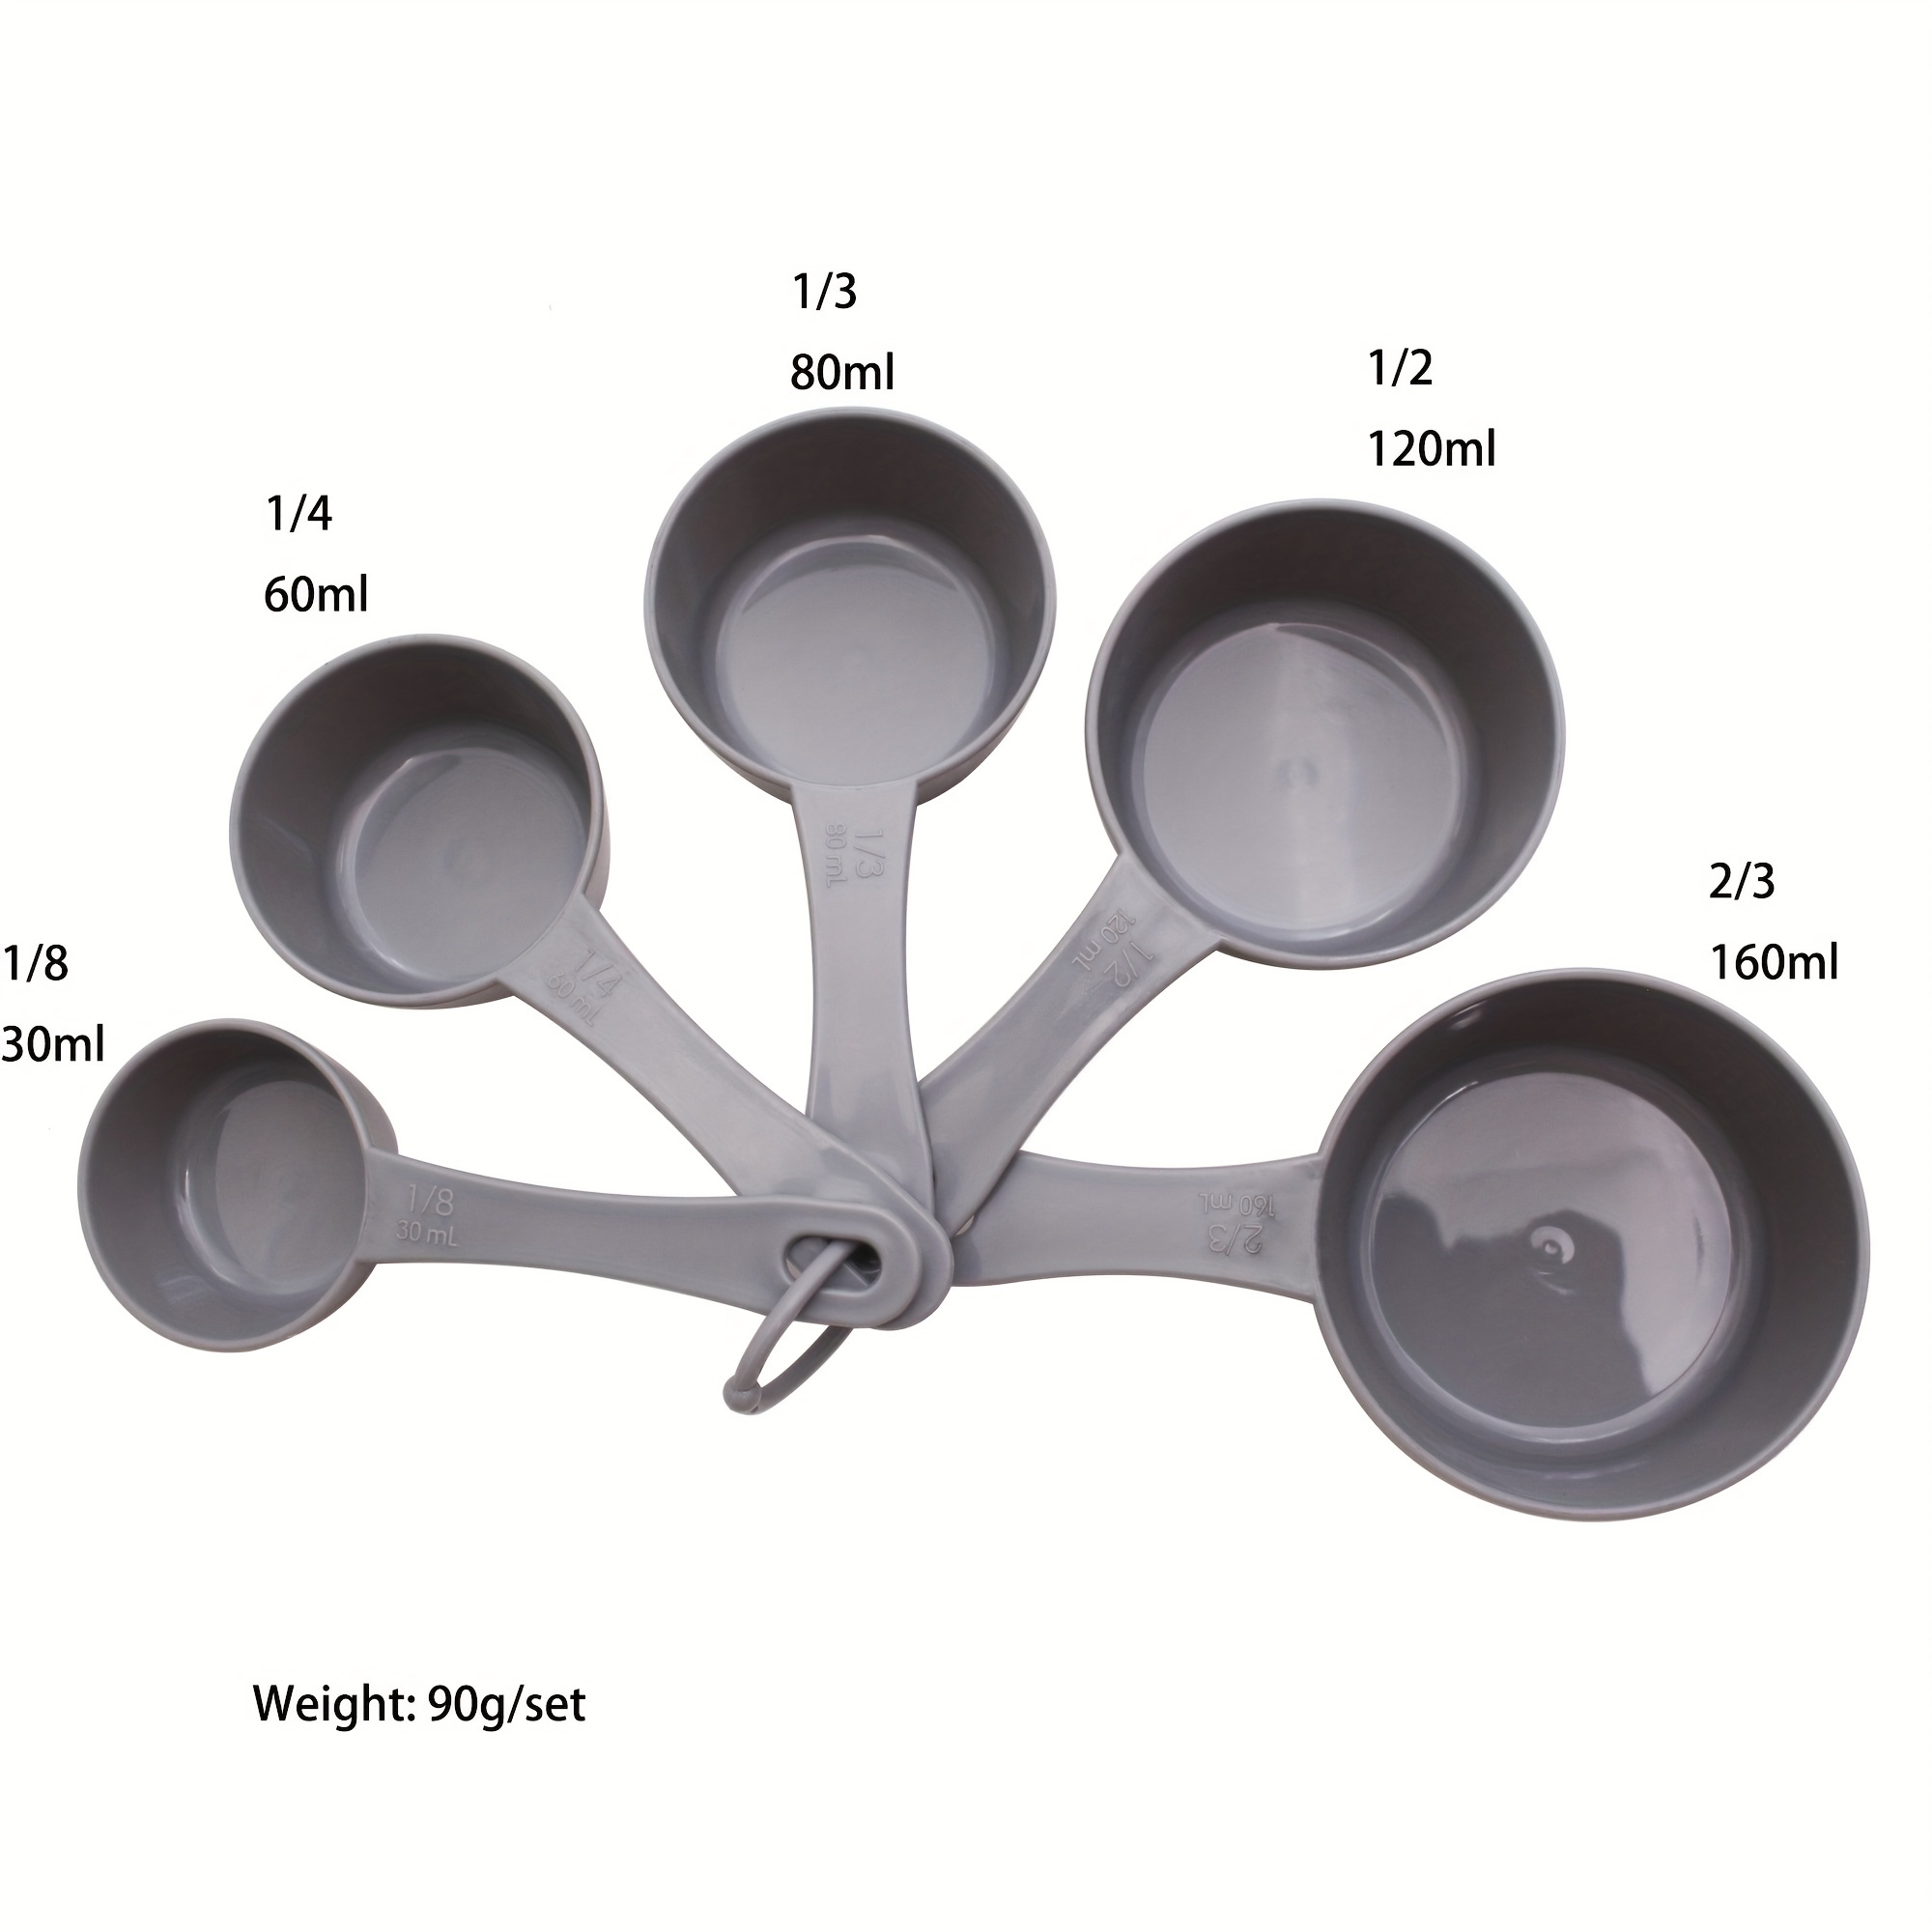 8-Piece Measuring Cup & Spoon Set, Grey, Plastic Sold by at Home